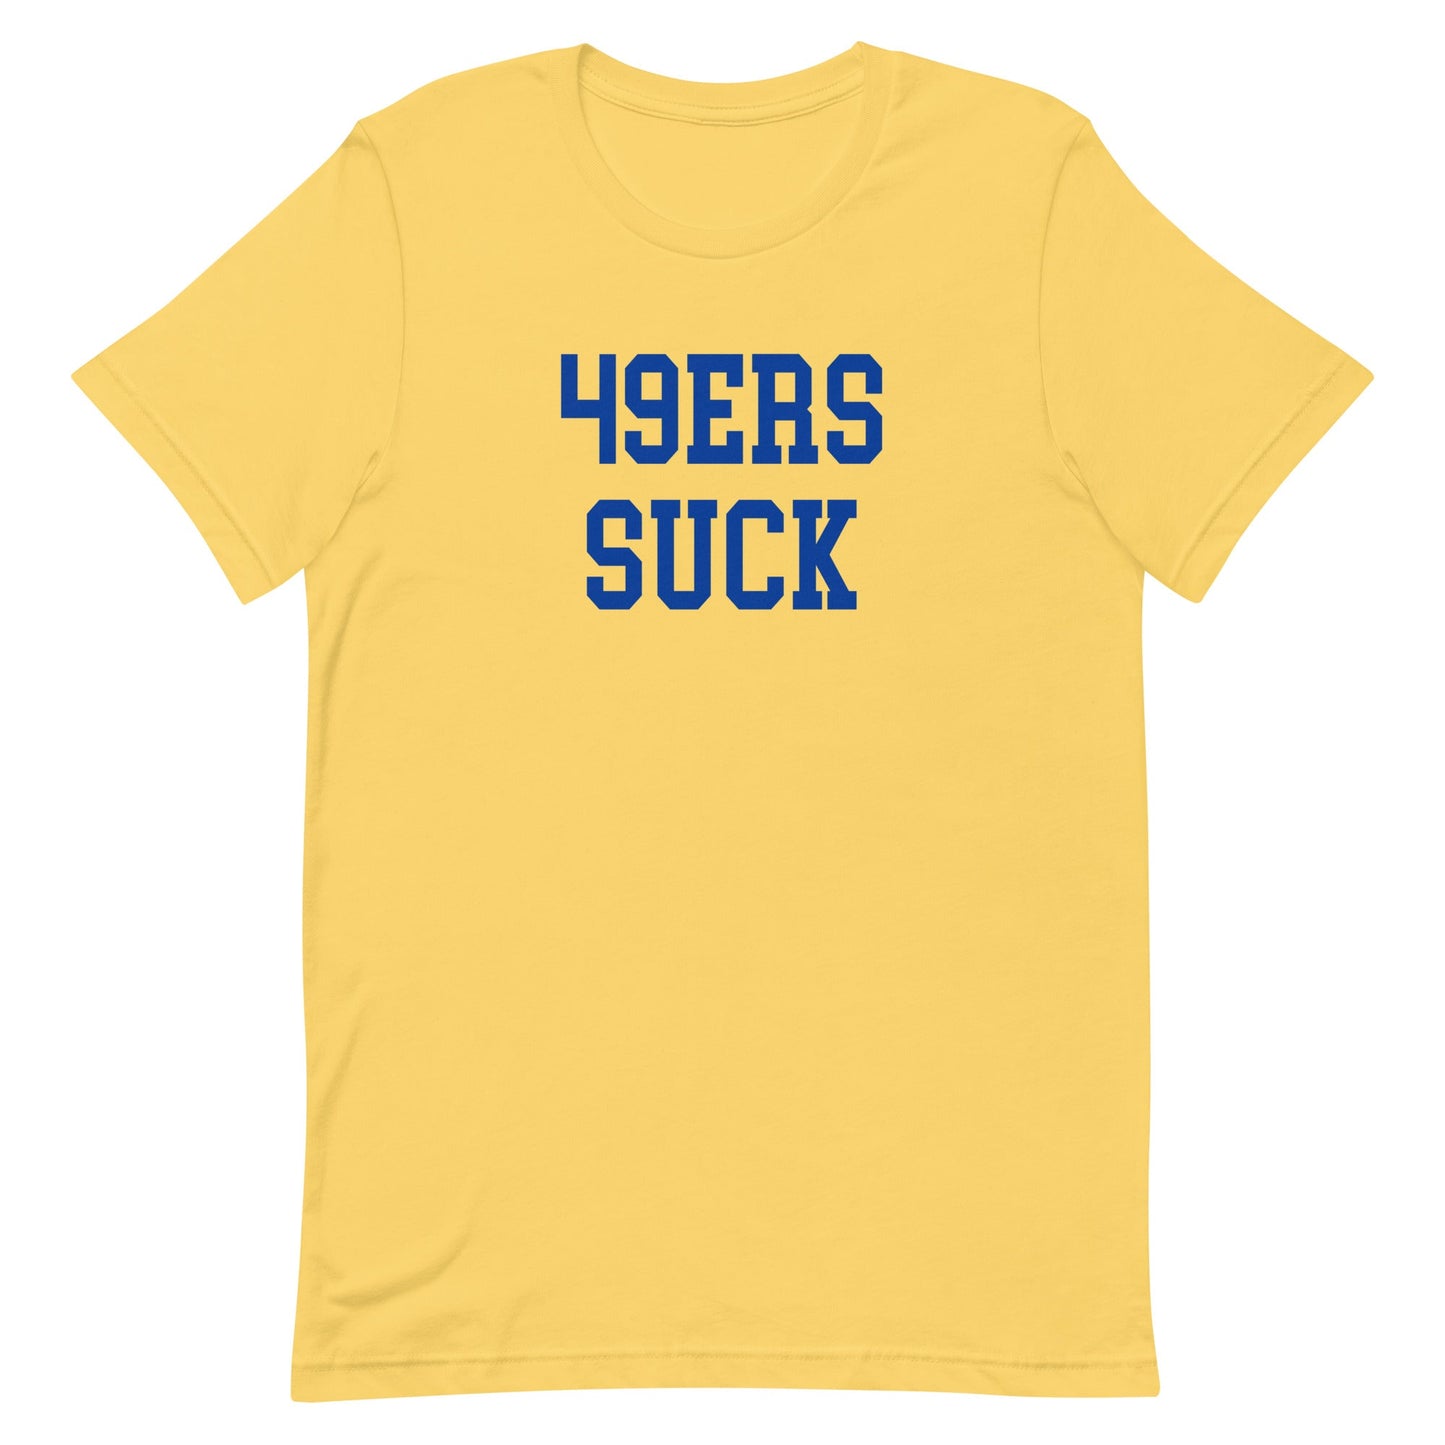 I Hate The 49ers - St Louis Rams Shirt - Box Ver - Beef Shirts